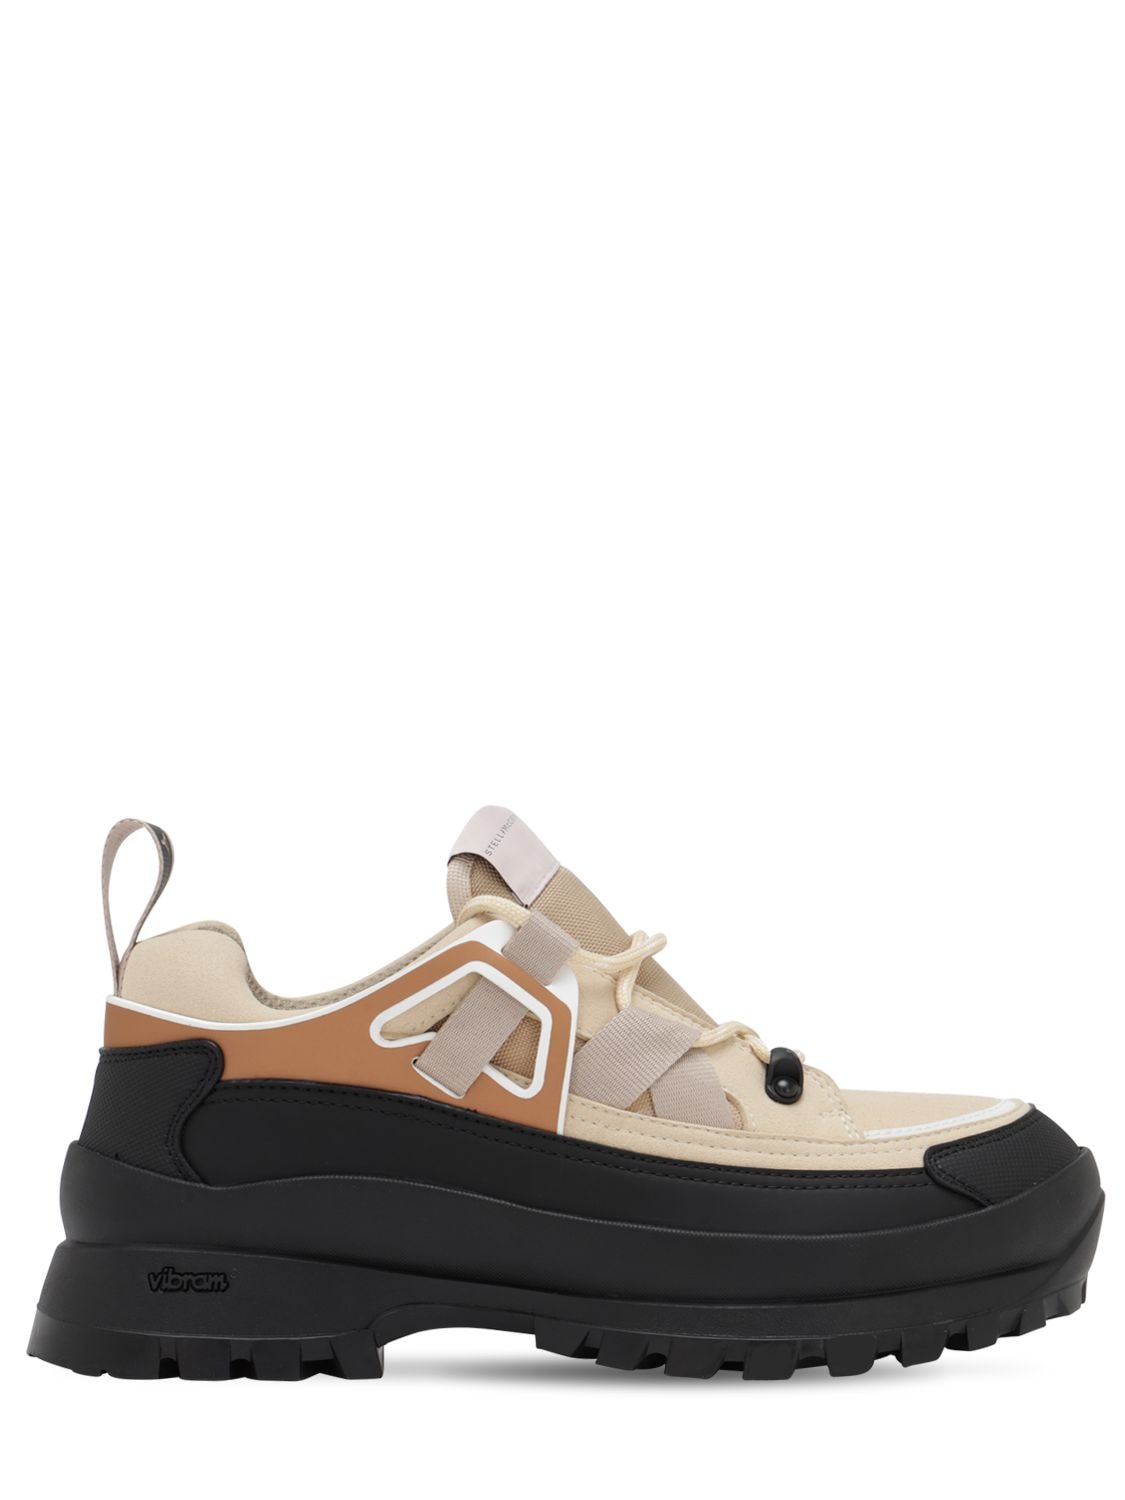 STELLA MCCARTNEY CHUNKY FAUX LEATHER & MESH SNEAKERS,72IM82001-MJUXNG2